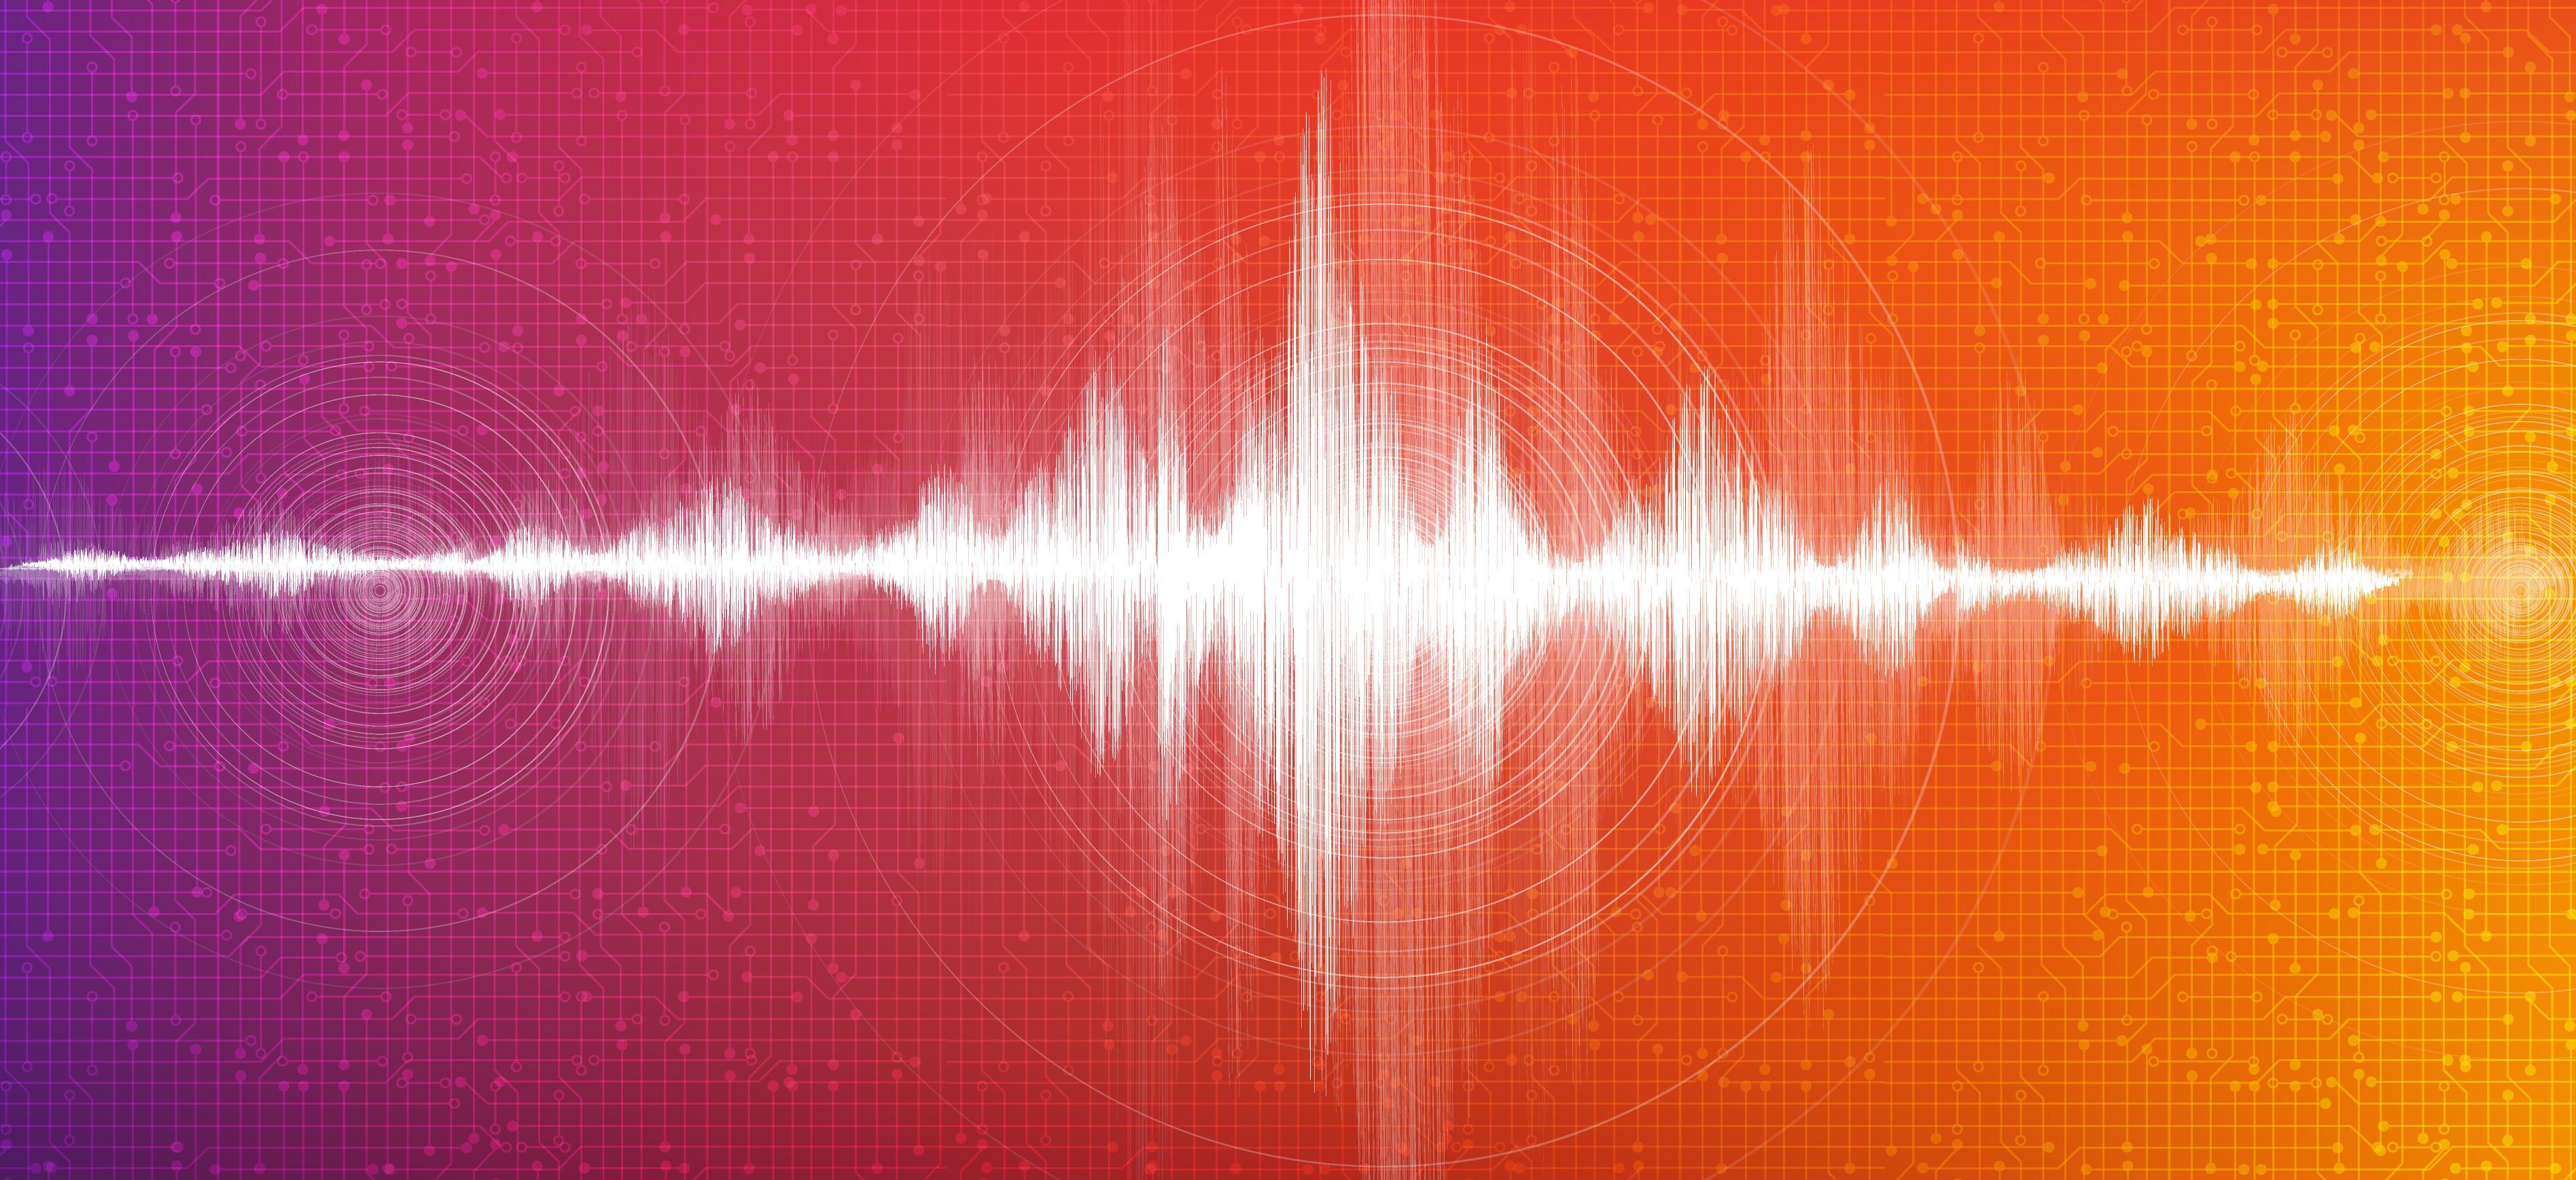 Digital Sound Wave on Colorful Background,technology and earthquake